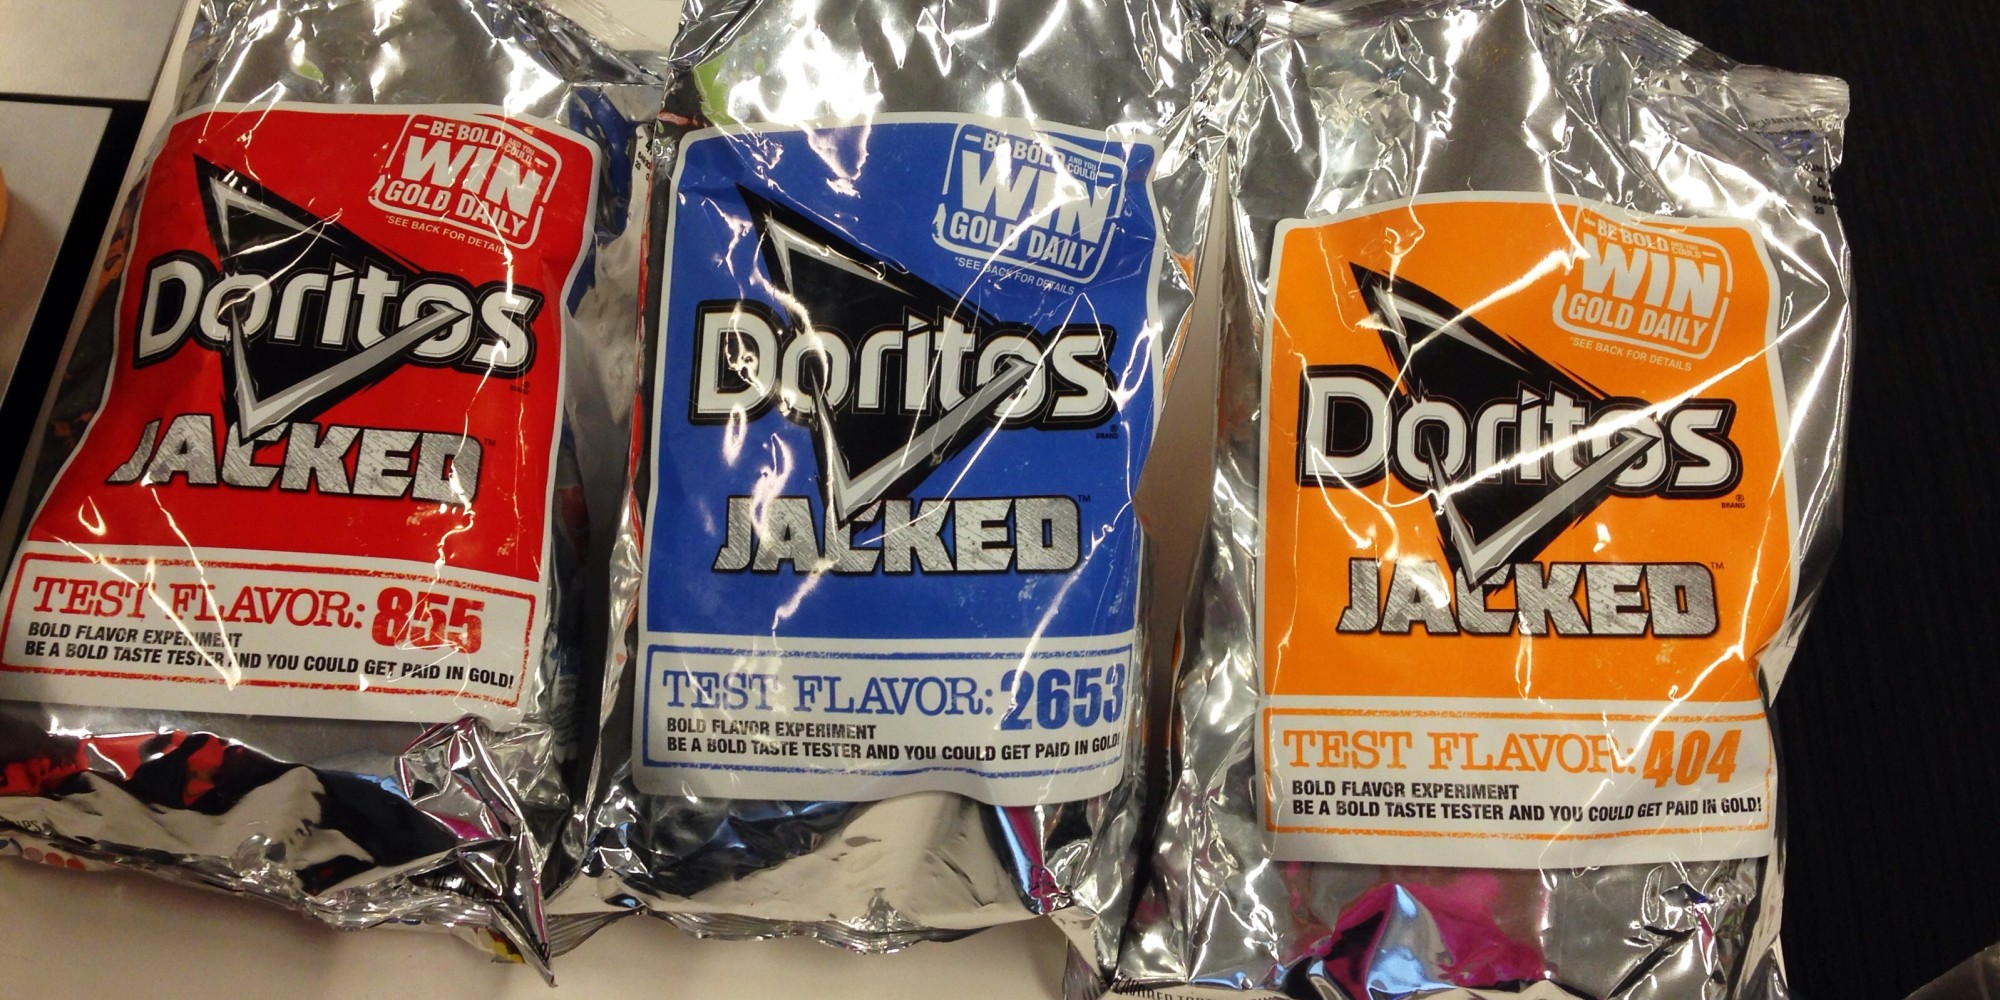 We Tasted The 3 Mystery Doritos Flavors Here's Everything You Need To